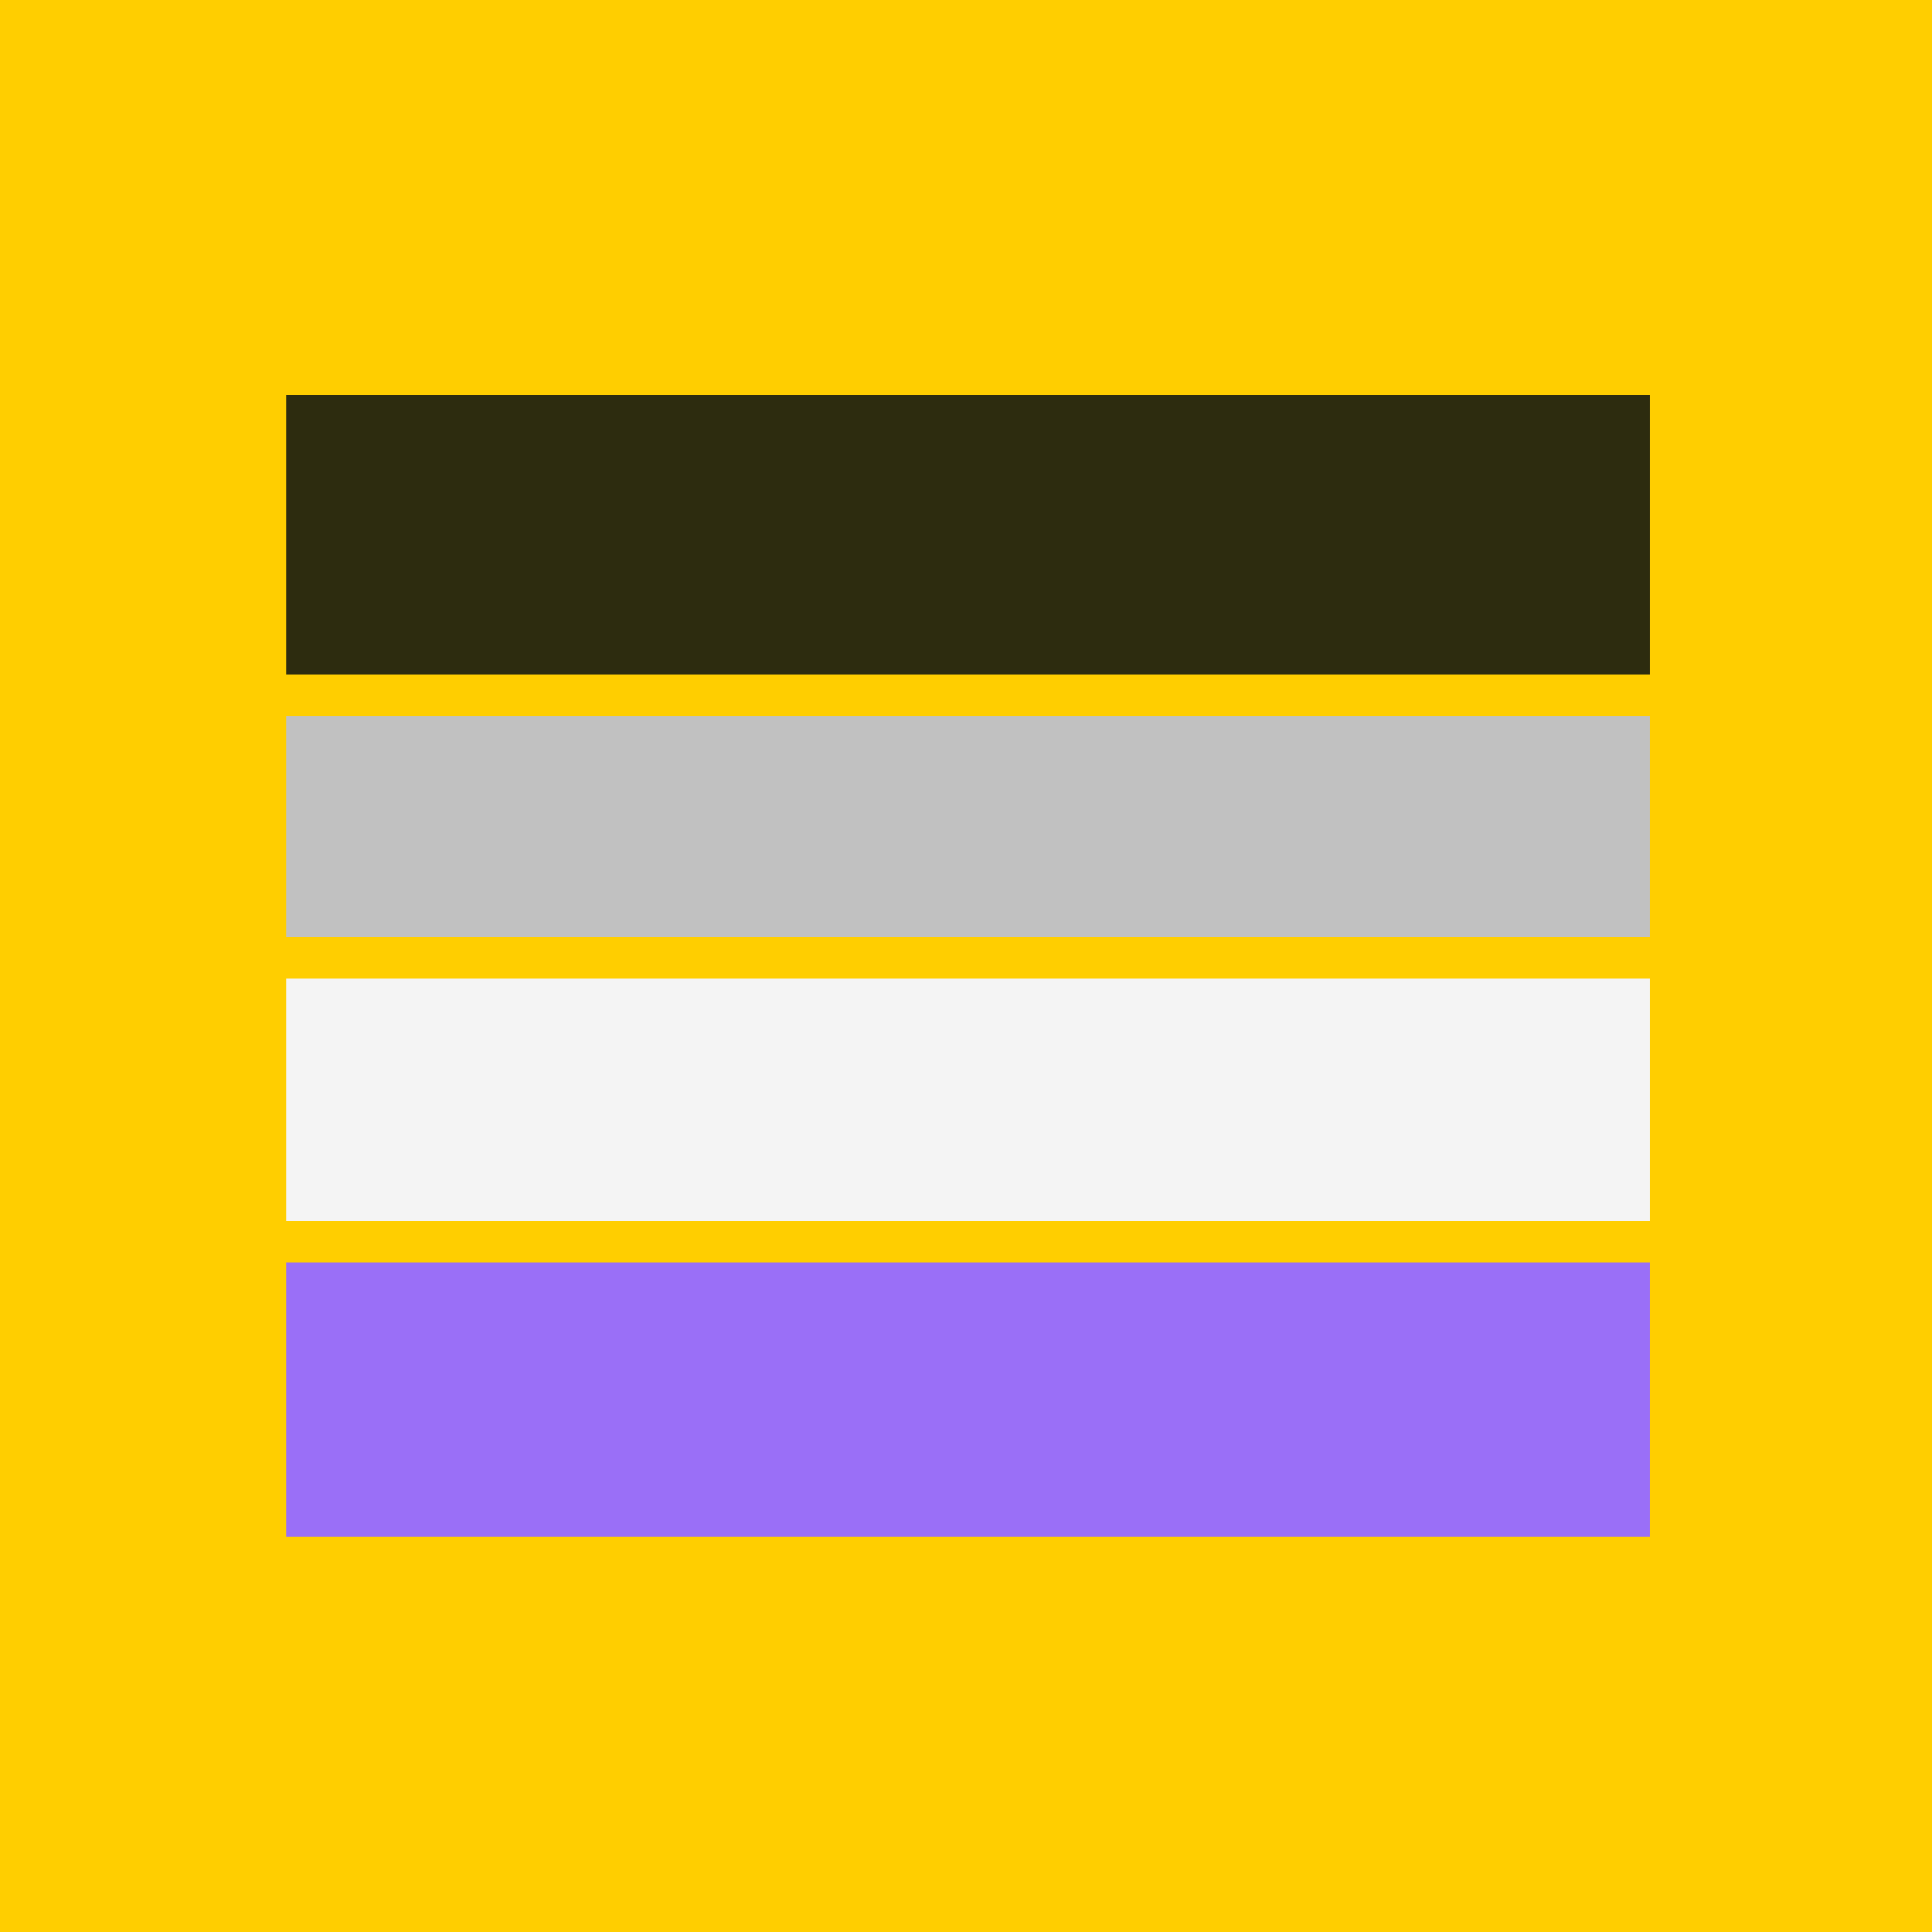 Asexual Flag